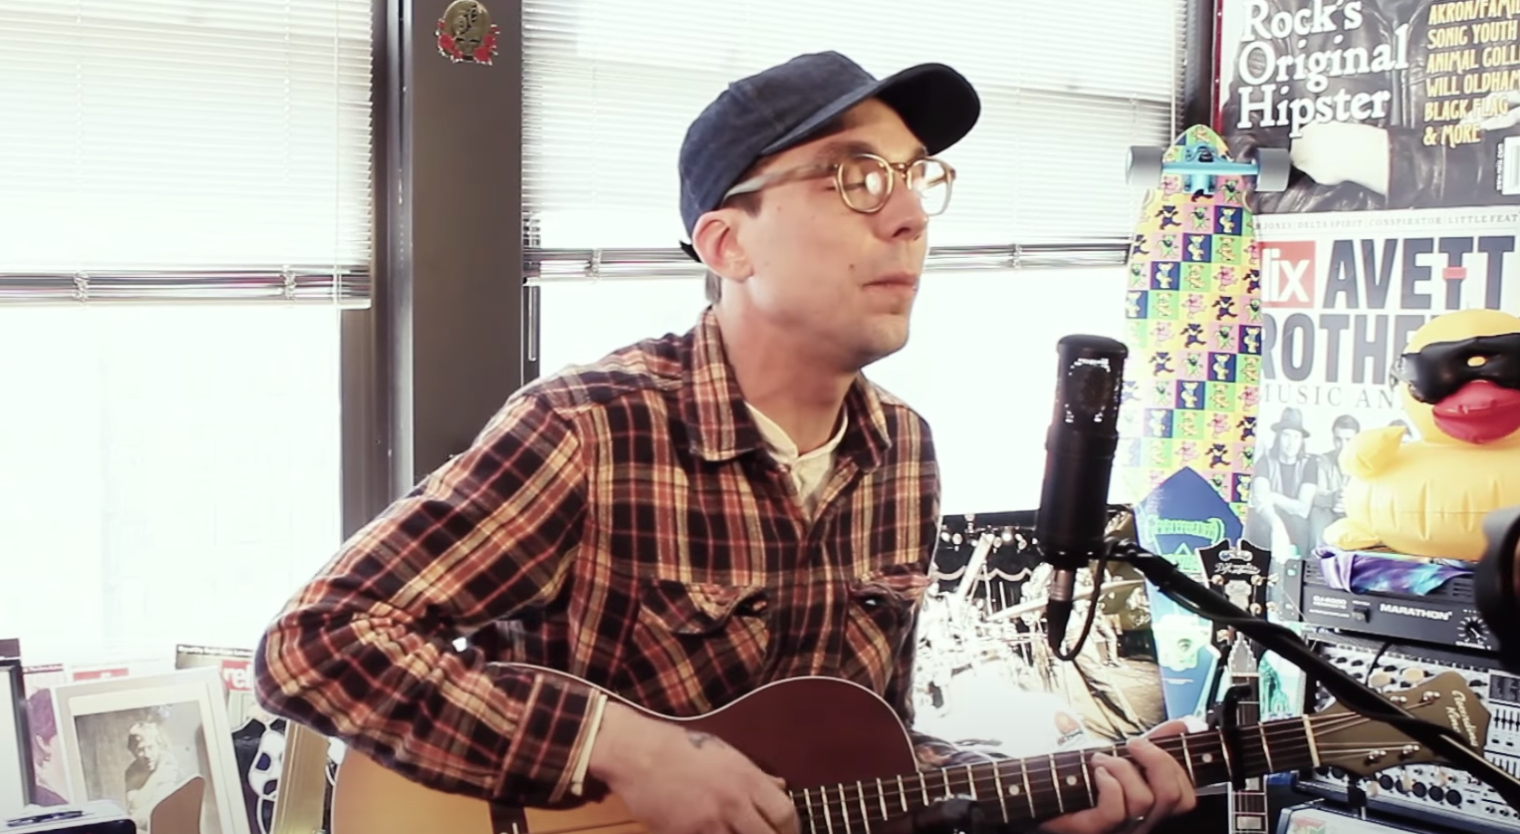 In The Wake of His Passing, Watch Justin Townes Earle Perform in the Relix Office